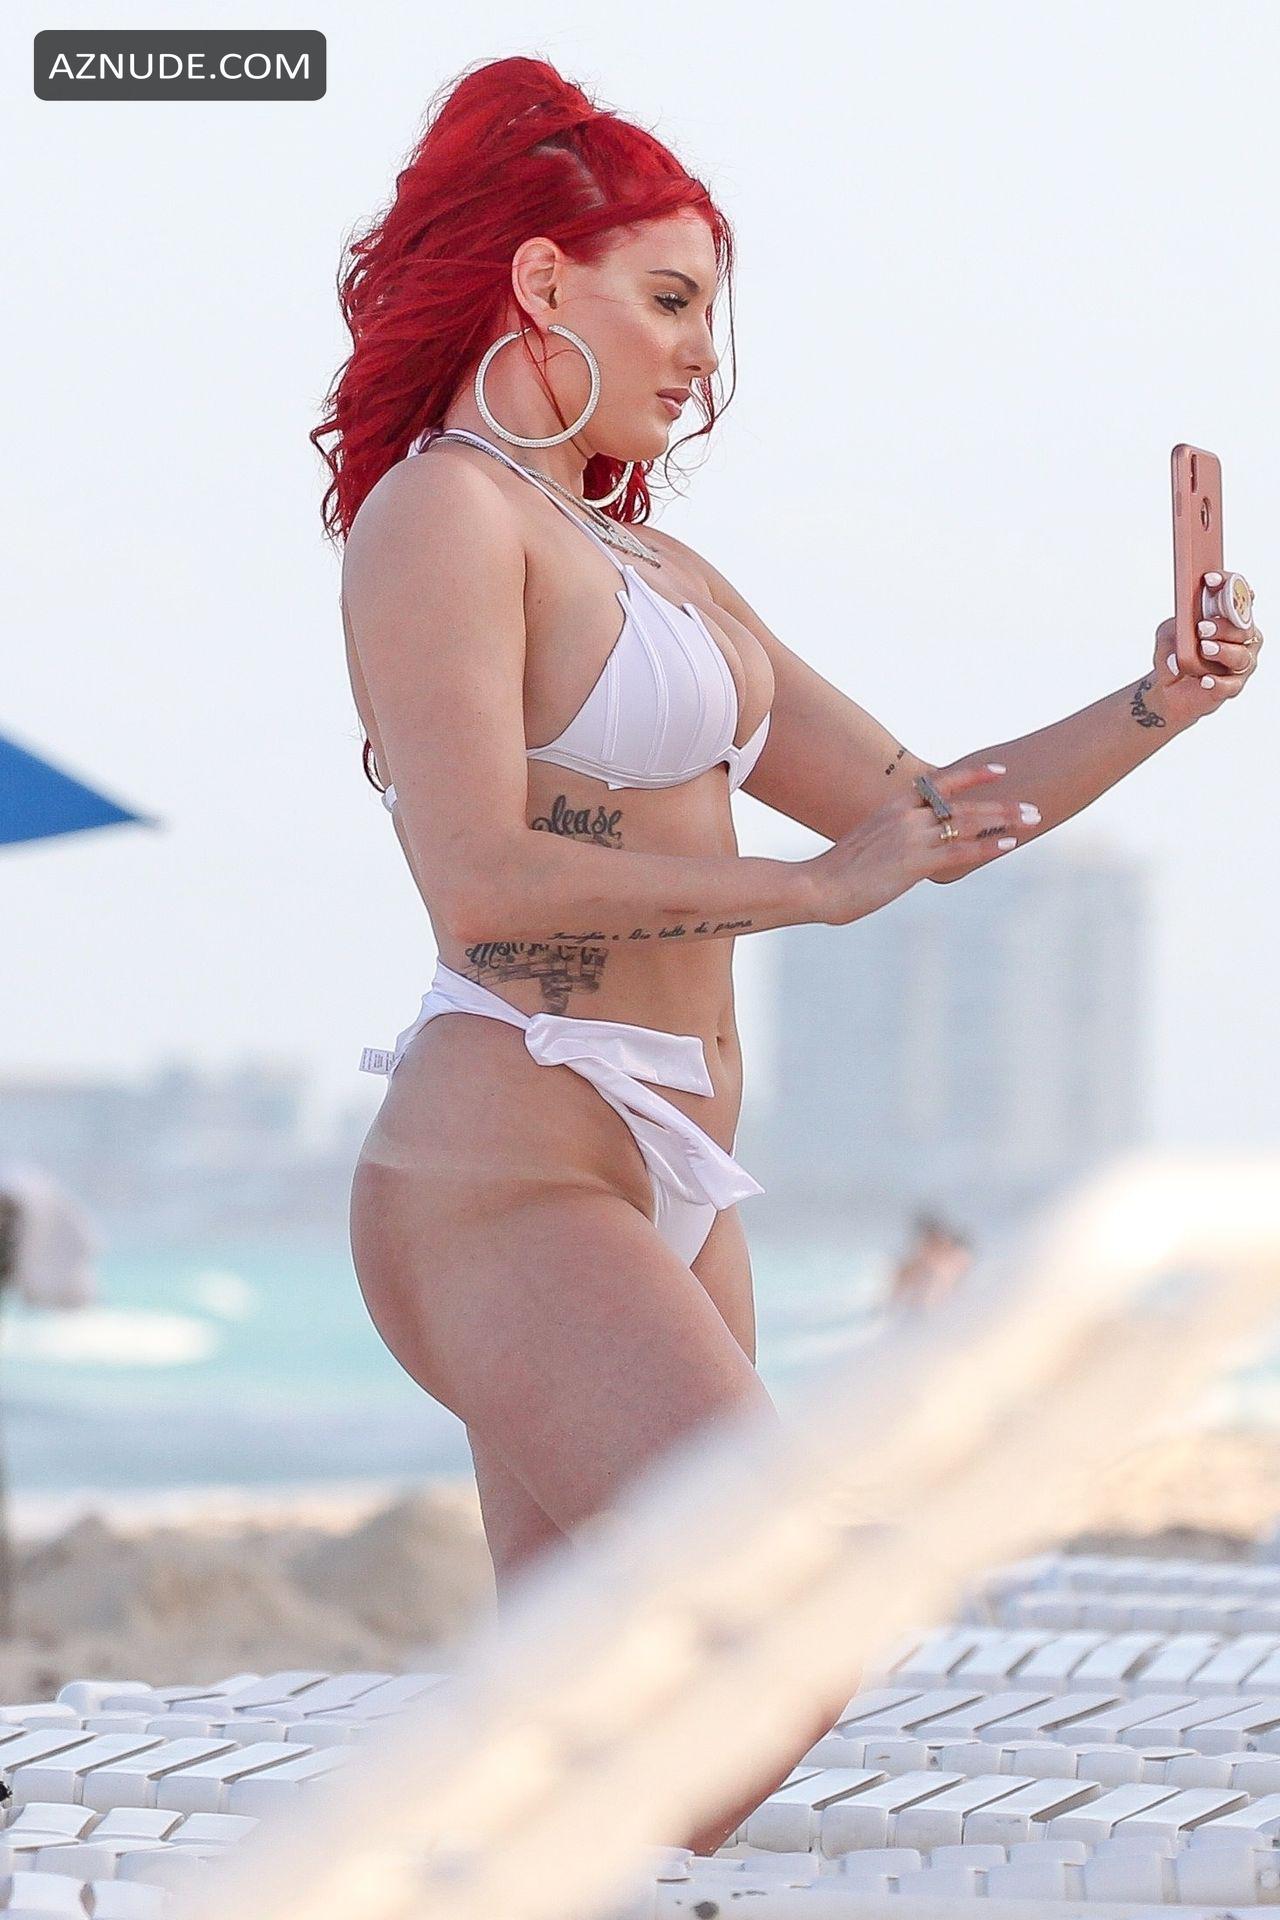 Justina Valentine Out In Cancun Enjoying Mtv Spring Break With Mystery Beau Aznude